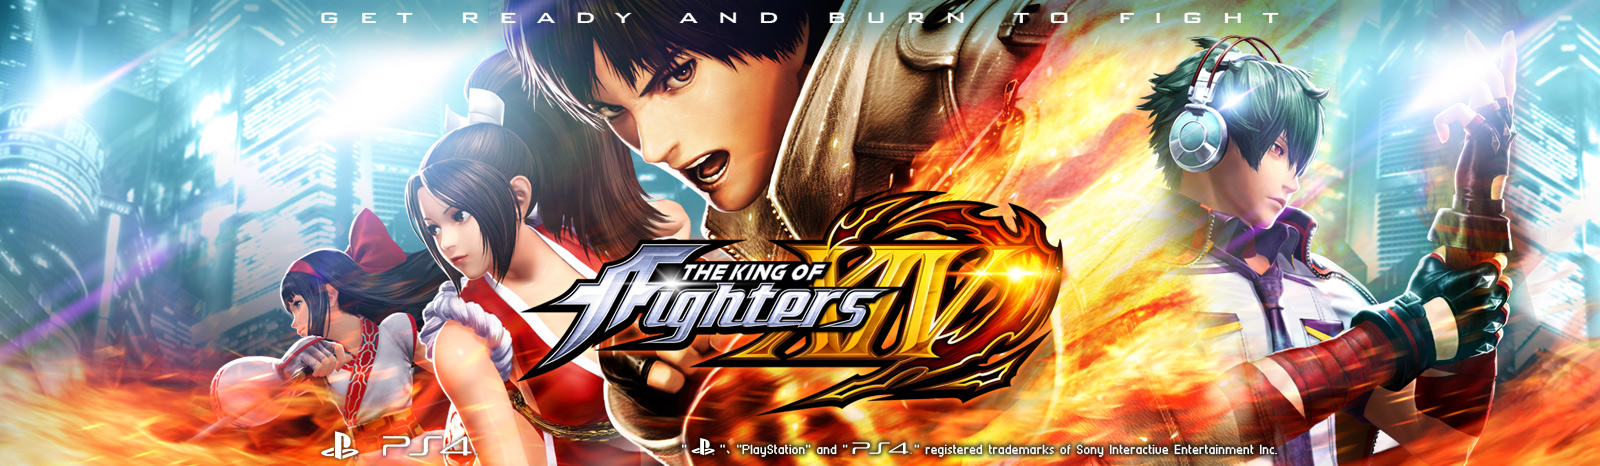 SNK OFFICIAL WEBSITENEWSTHE KING OF FIGHTERS XV Season 2  starts Jan 17th, 2023!THE KING OF FIGHTERS XV Season 2 kickstarts January 2023! SHINGO YABUKI to be first DLC character of the S2 lineup! Character refinements for all characters also inbound!Ten iconic NEOGEO POCKET COLOR titles are coming to  Nintendo Switch™ and Steam via NEOGEO POCKET COLOR SELECTION Vol.2The Official KOF XV tournament, SNK REGIONAL BOUTS, is here! An online tournament will be held in seven regions around the world to determine its own regional champion. Registration begins today!Notice of End of Service for “METAL SLUG DEFENSE”Notice of End of Service for “METAL SLUG ATTACK”DLC TEAM SAMURAI slices into  THE KING OF FIGHTERS XV on October 4th!Legends never die… After more than 20 years, FATAL FURY / GAROU is coming back! Finally, the long awaited sequel has been green-lit!EMBRACE ROLLBACK Rollback netcode is coming to SAMURAI SHODOWN  in 2023 through an online update!DLC Team AWAKENED OROCHI is coming to THE KING OF FIGHTERS XV August 8th at 12AM PDT!  DLC Team SAMURAI announced for fall release!